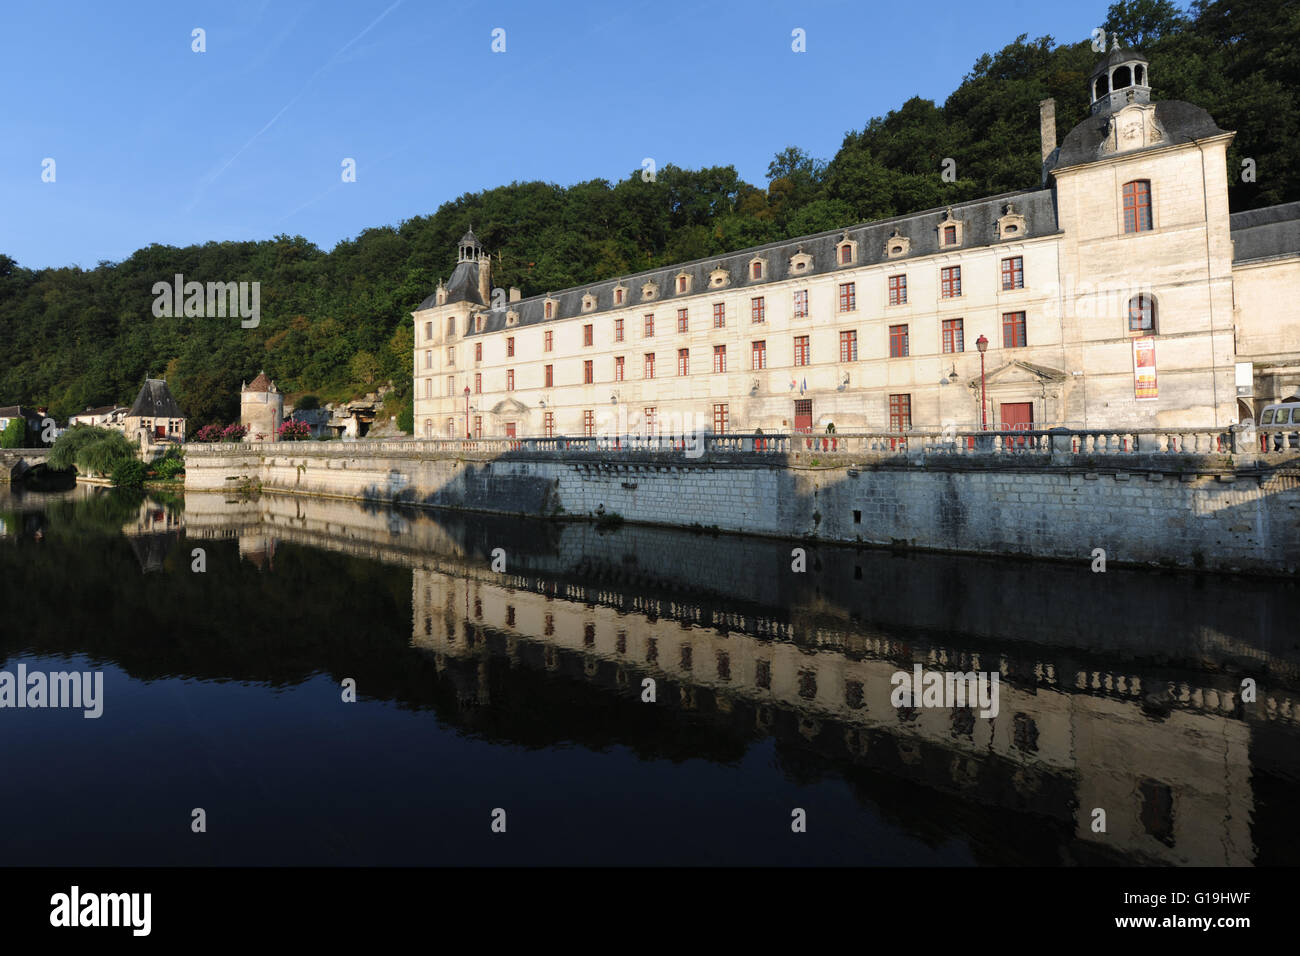 Early morning view of Abbey of Brantôme on the River Dronne, Brantome-en-Perigord, France Stock Photo